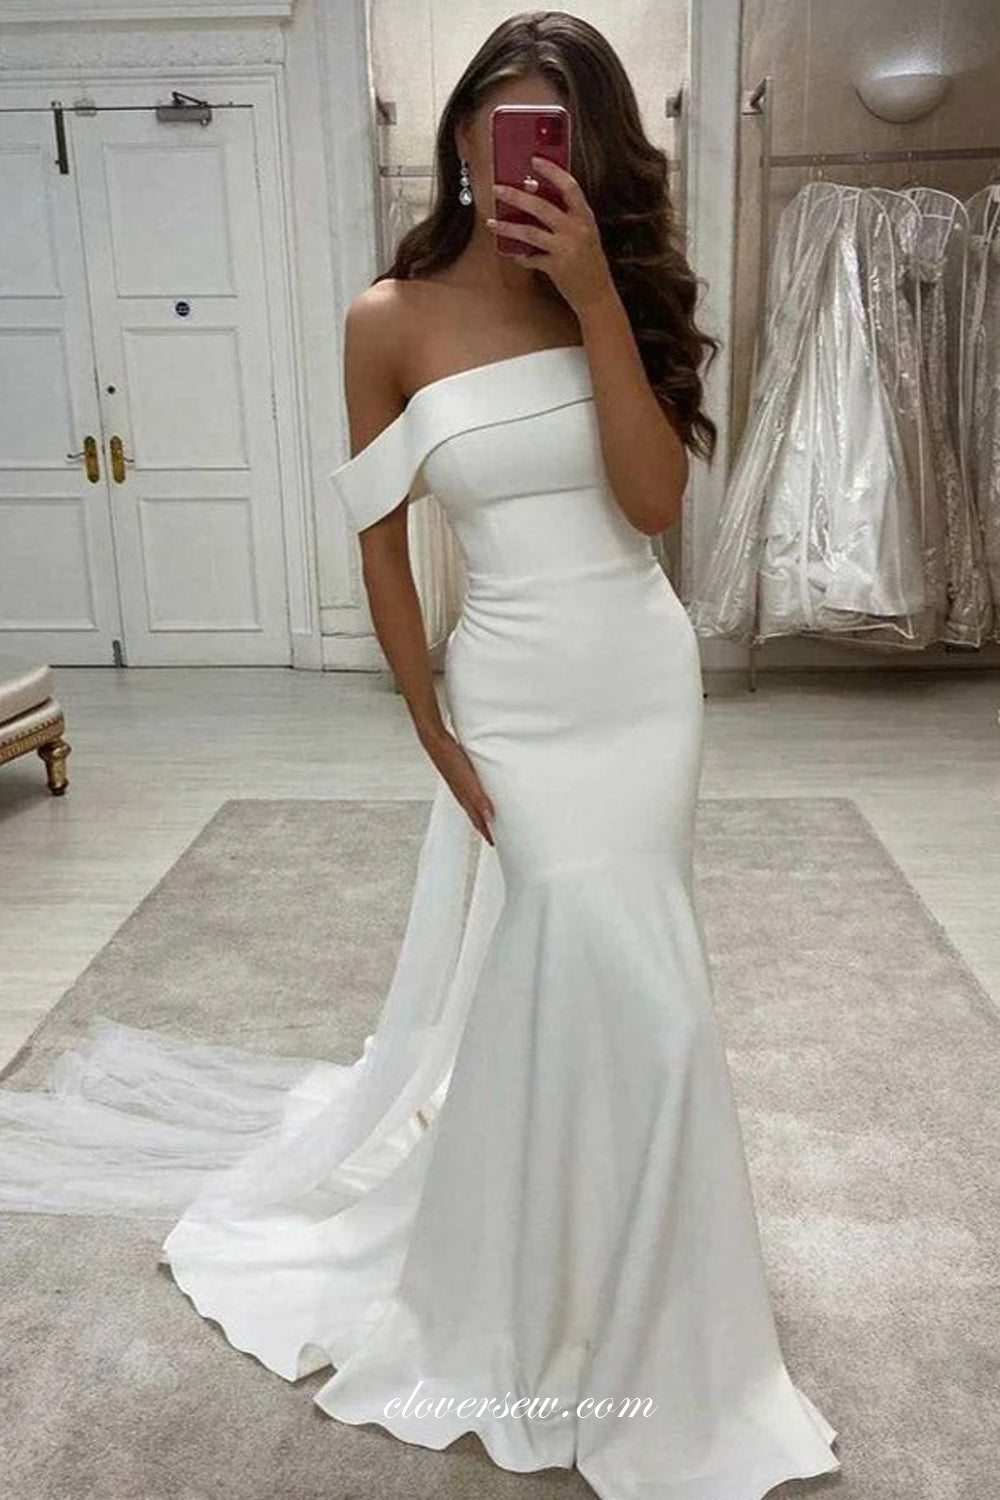 Off White Satin Simple Off The Shoulder Mermaid With Bowknot Train Wedding Dresses, CW0335